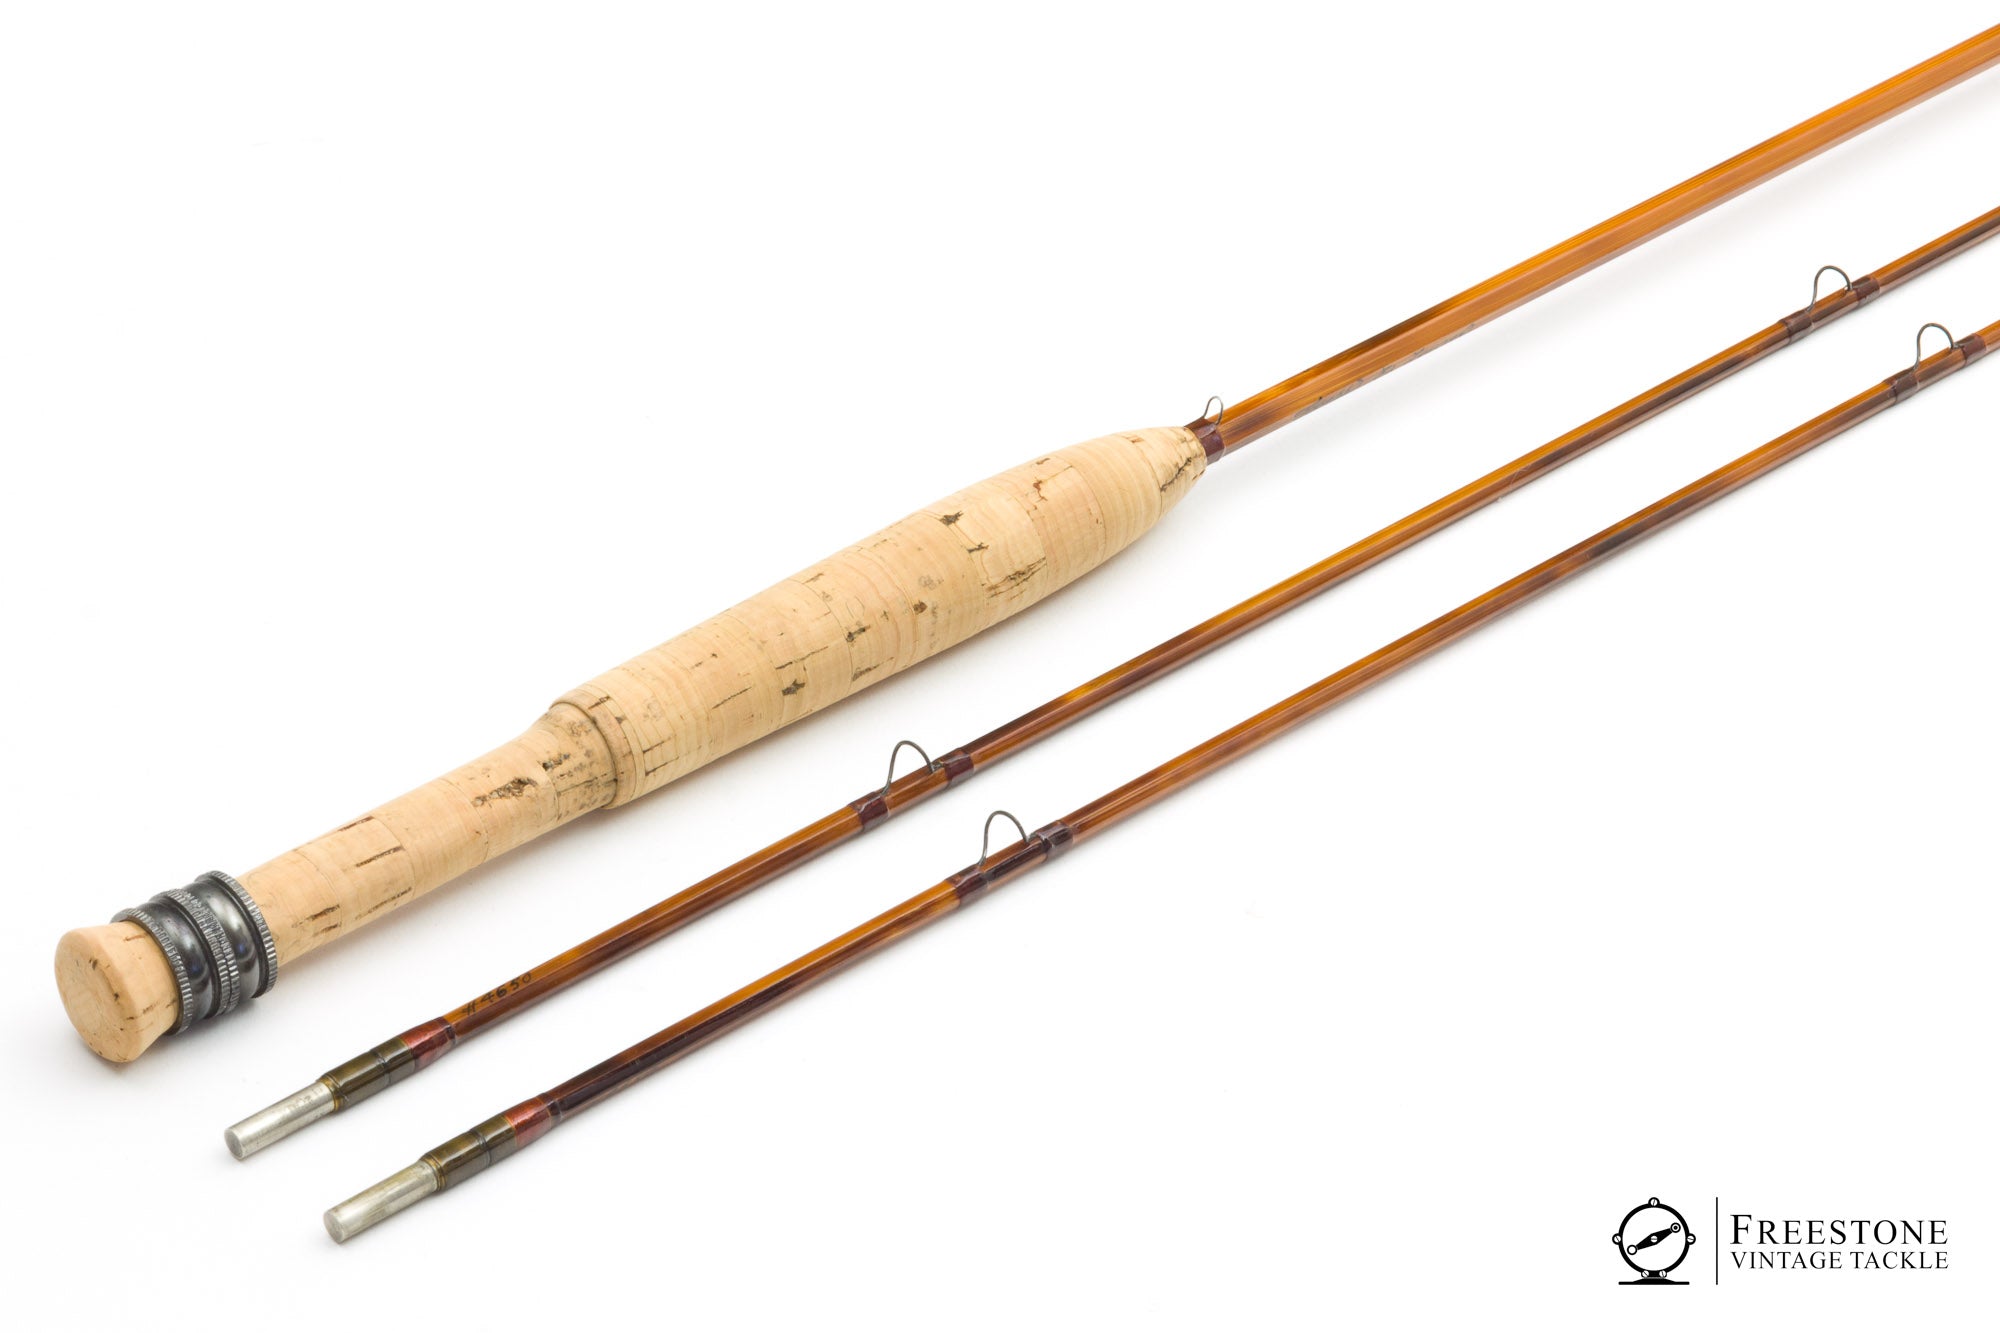 Paul H. Young - 'Midge' 6'3 2/2 4wt Bamboo Rod - Freestone Vintage Tackle